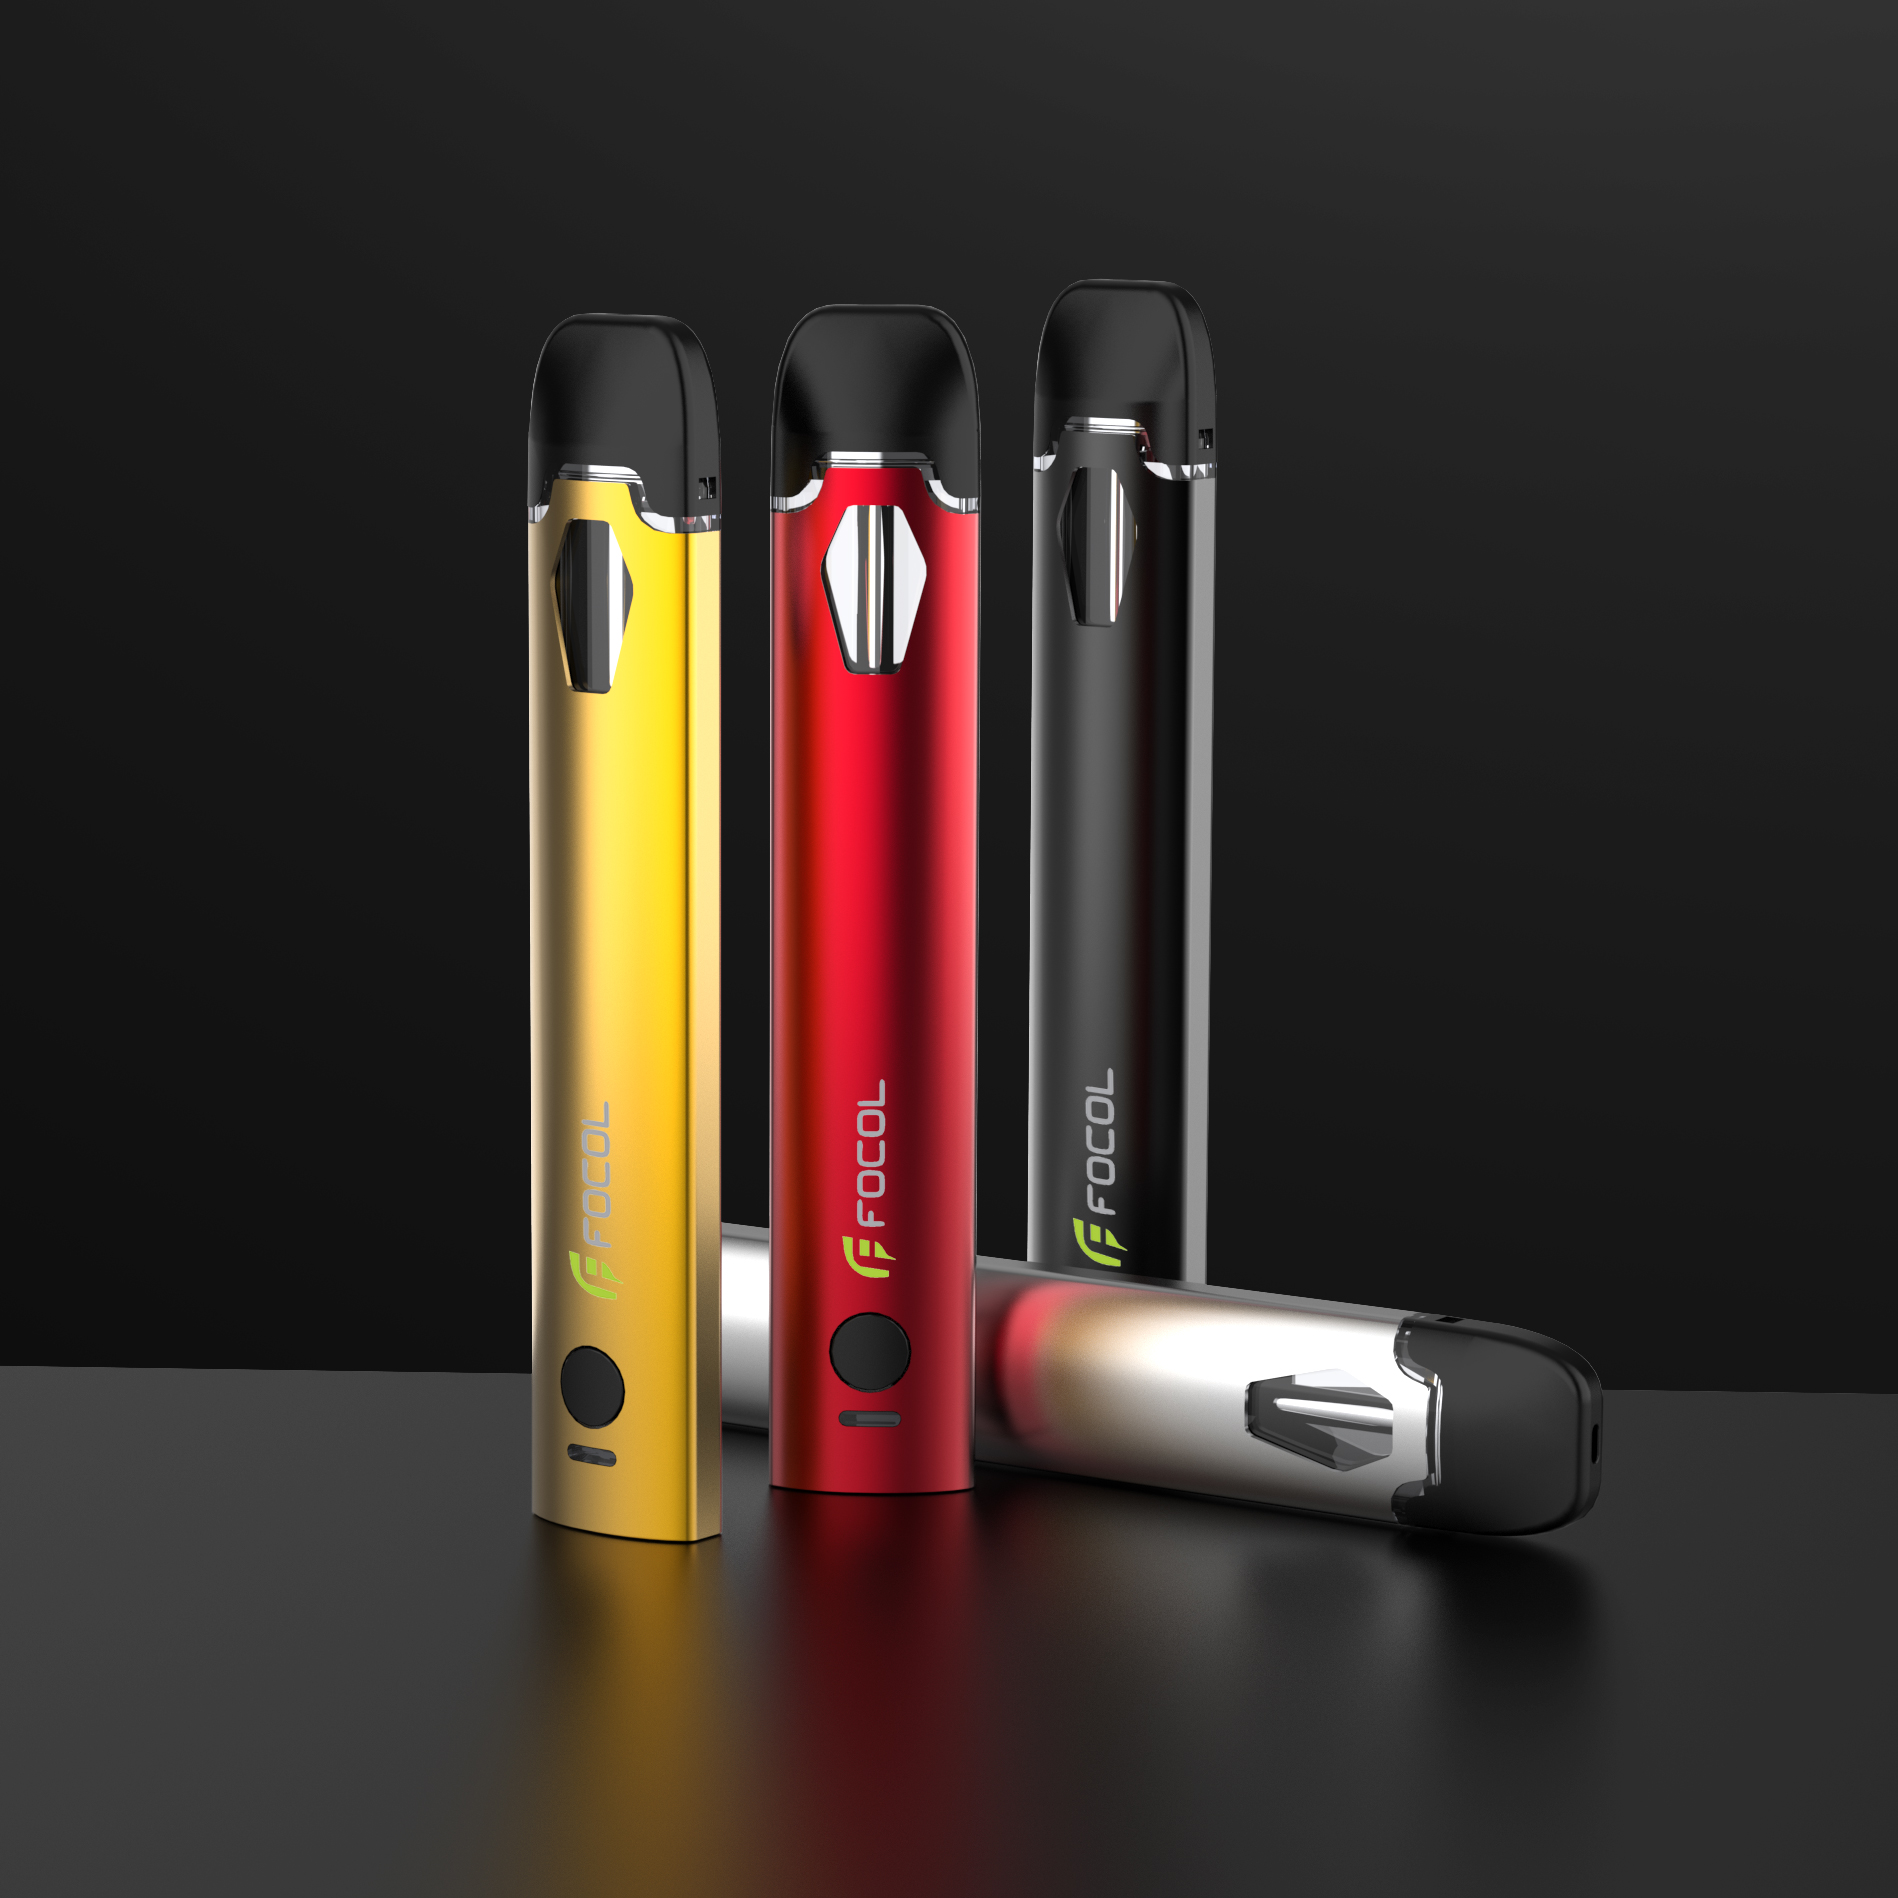  Buy The Best Delta 8 THC Disposable Vape Pens from Focol